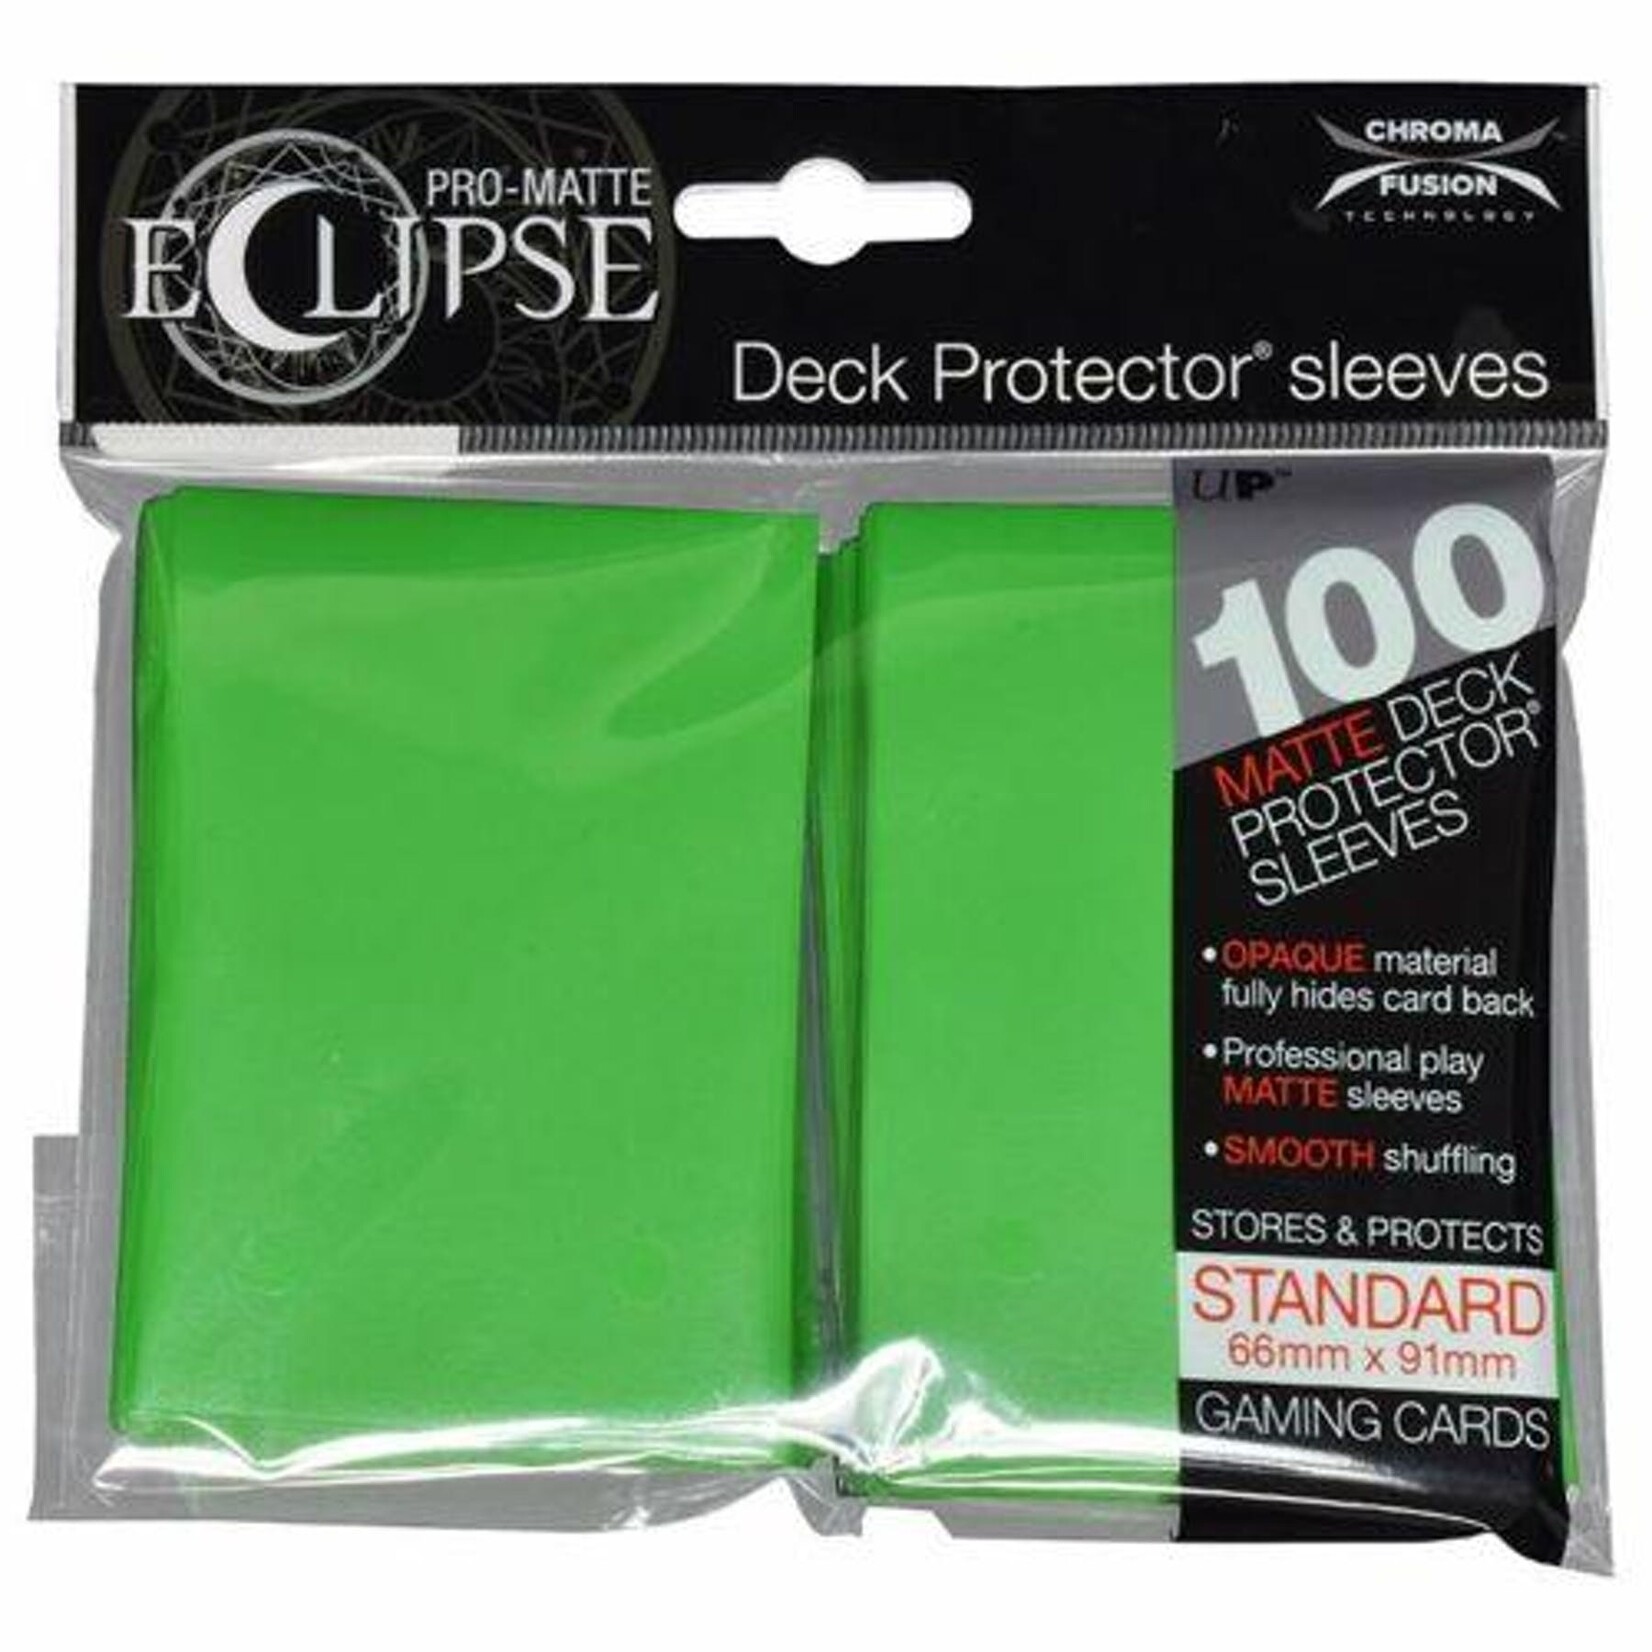 Ultra Pro Pro-Matte Eclipse 2.0 Standard Deck Protector Sleeves: Lime Green (100)